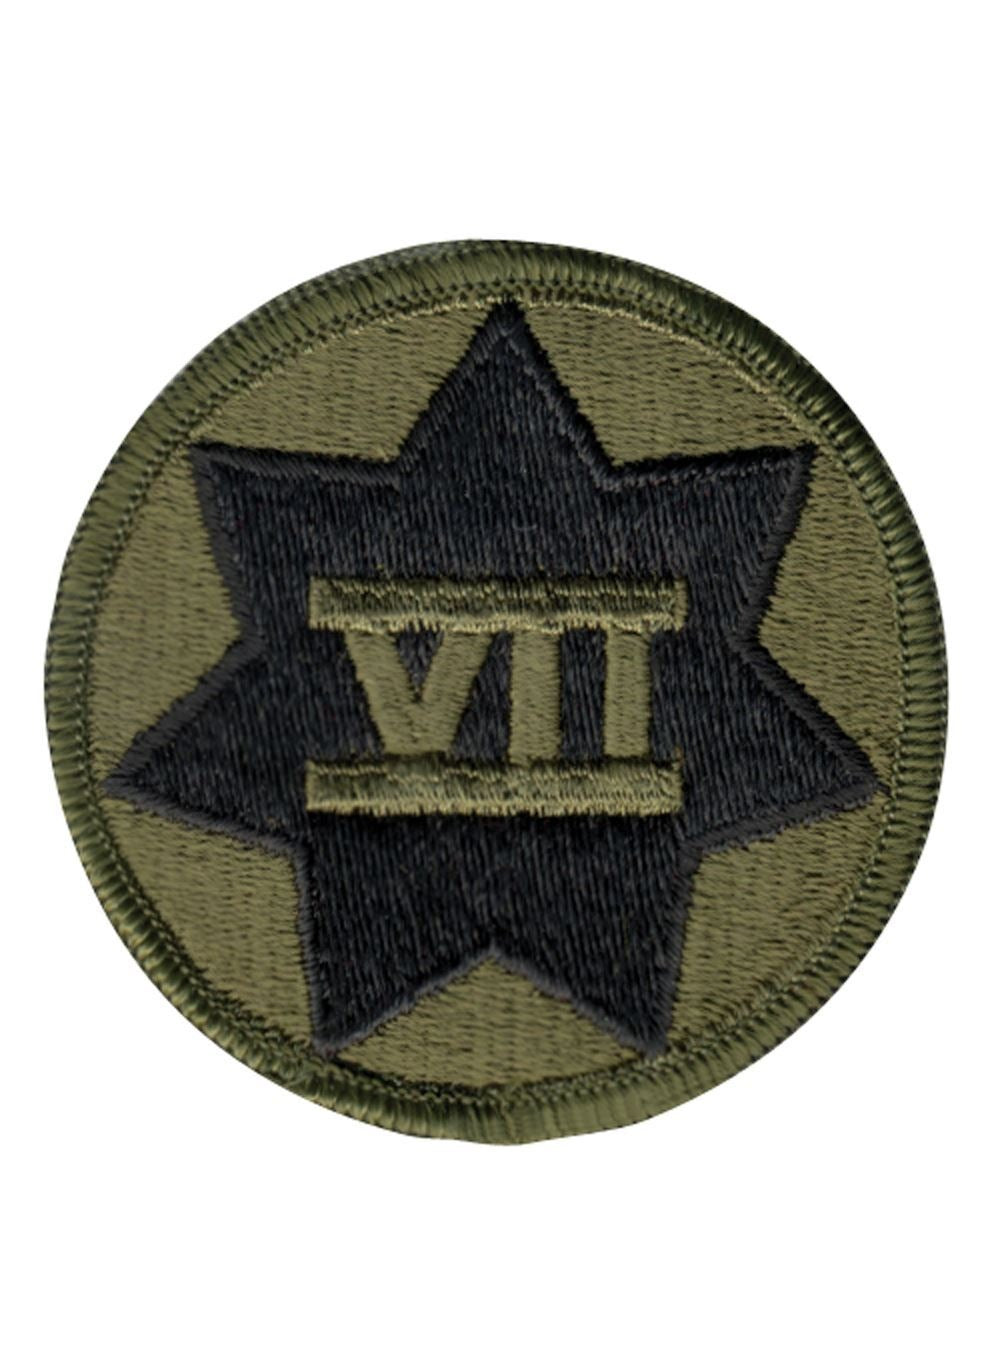 Patch - 7th Corps (10 per pack)